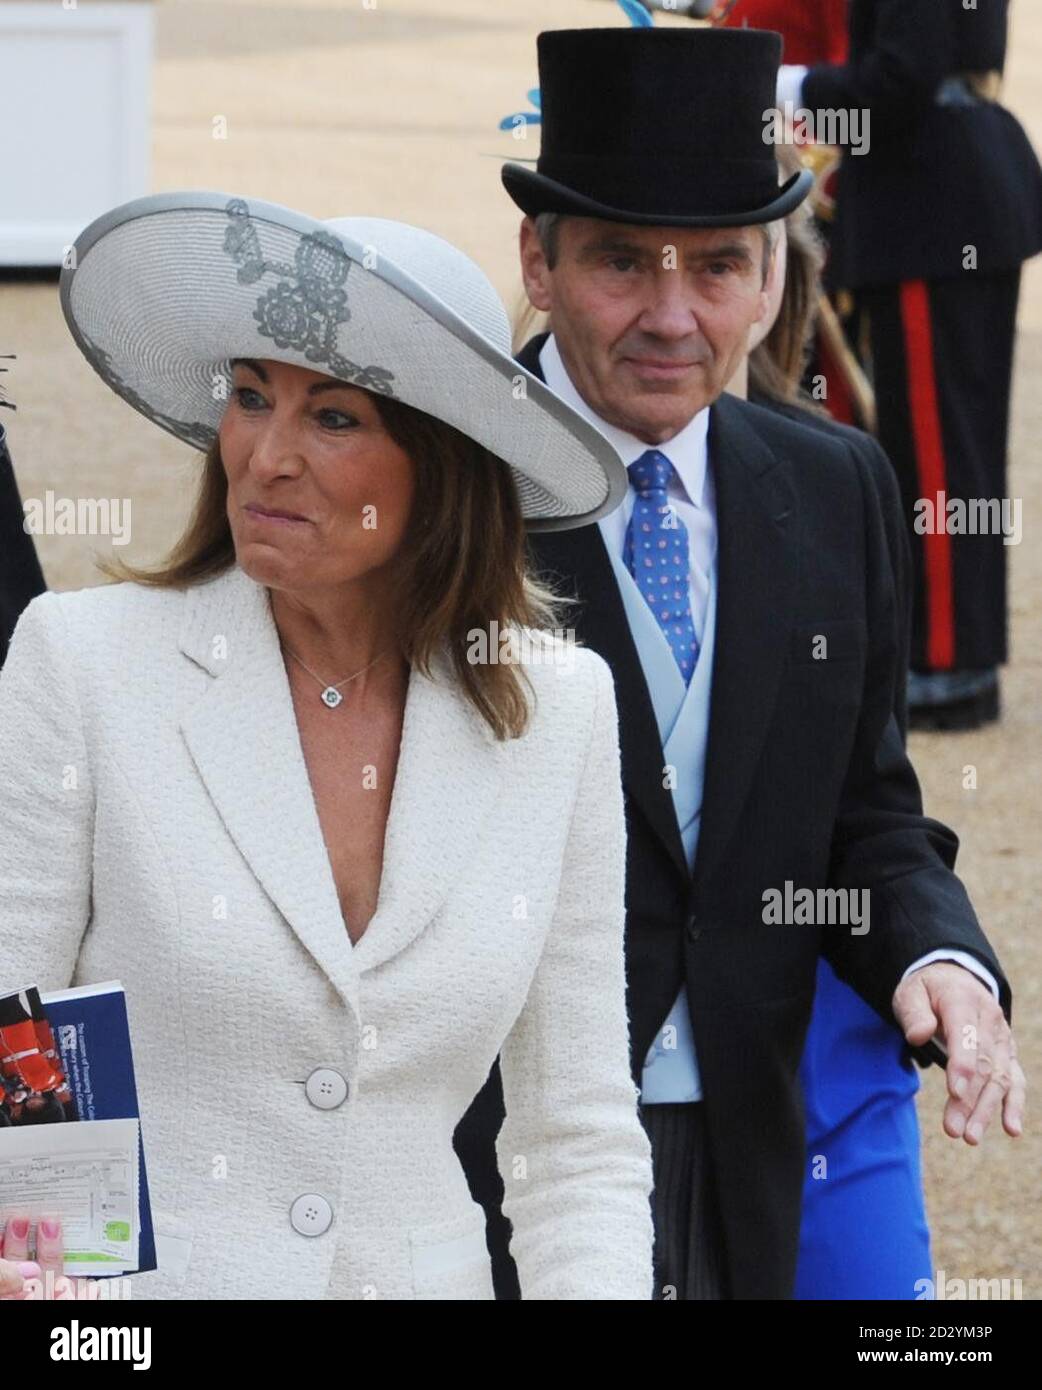 Carole and Michael Middleton, parents of the Duchess of Cambridge, attend the annual Trooping the Colour ceremony to mark the Queens official birthday at Horse Guards Parade in Westminster, central London. Stock Photo